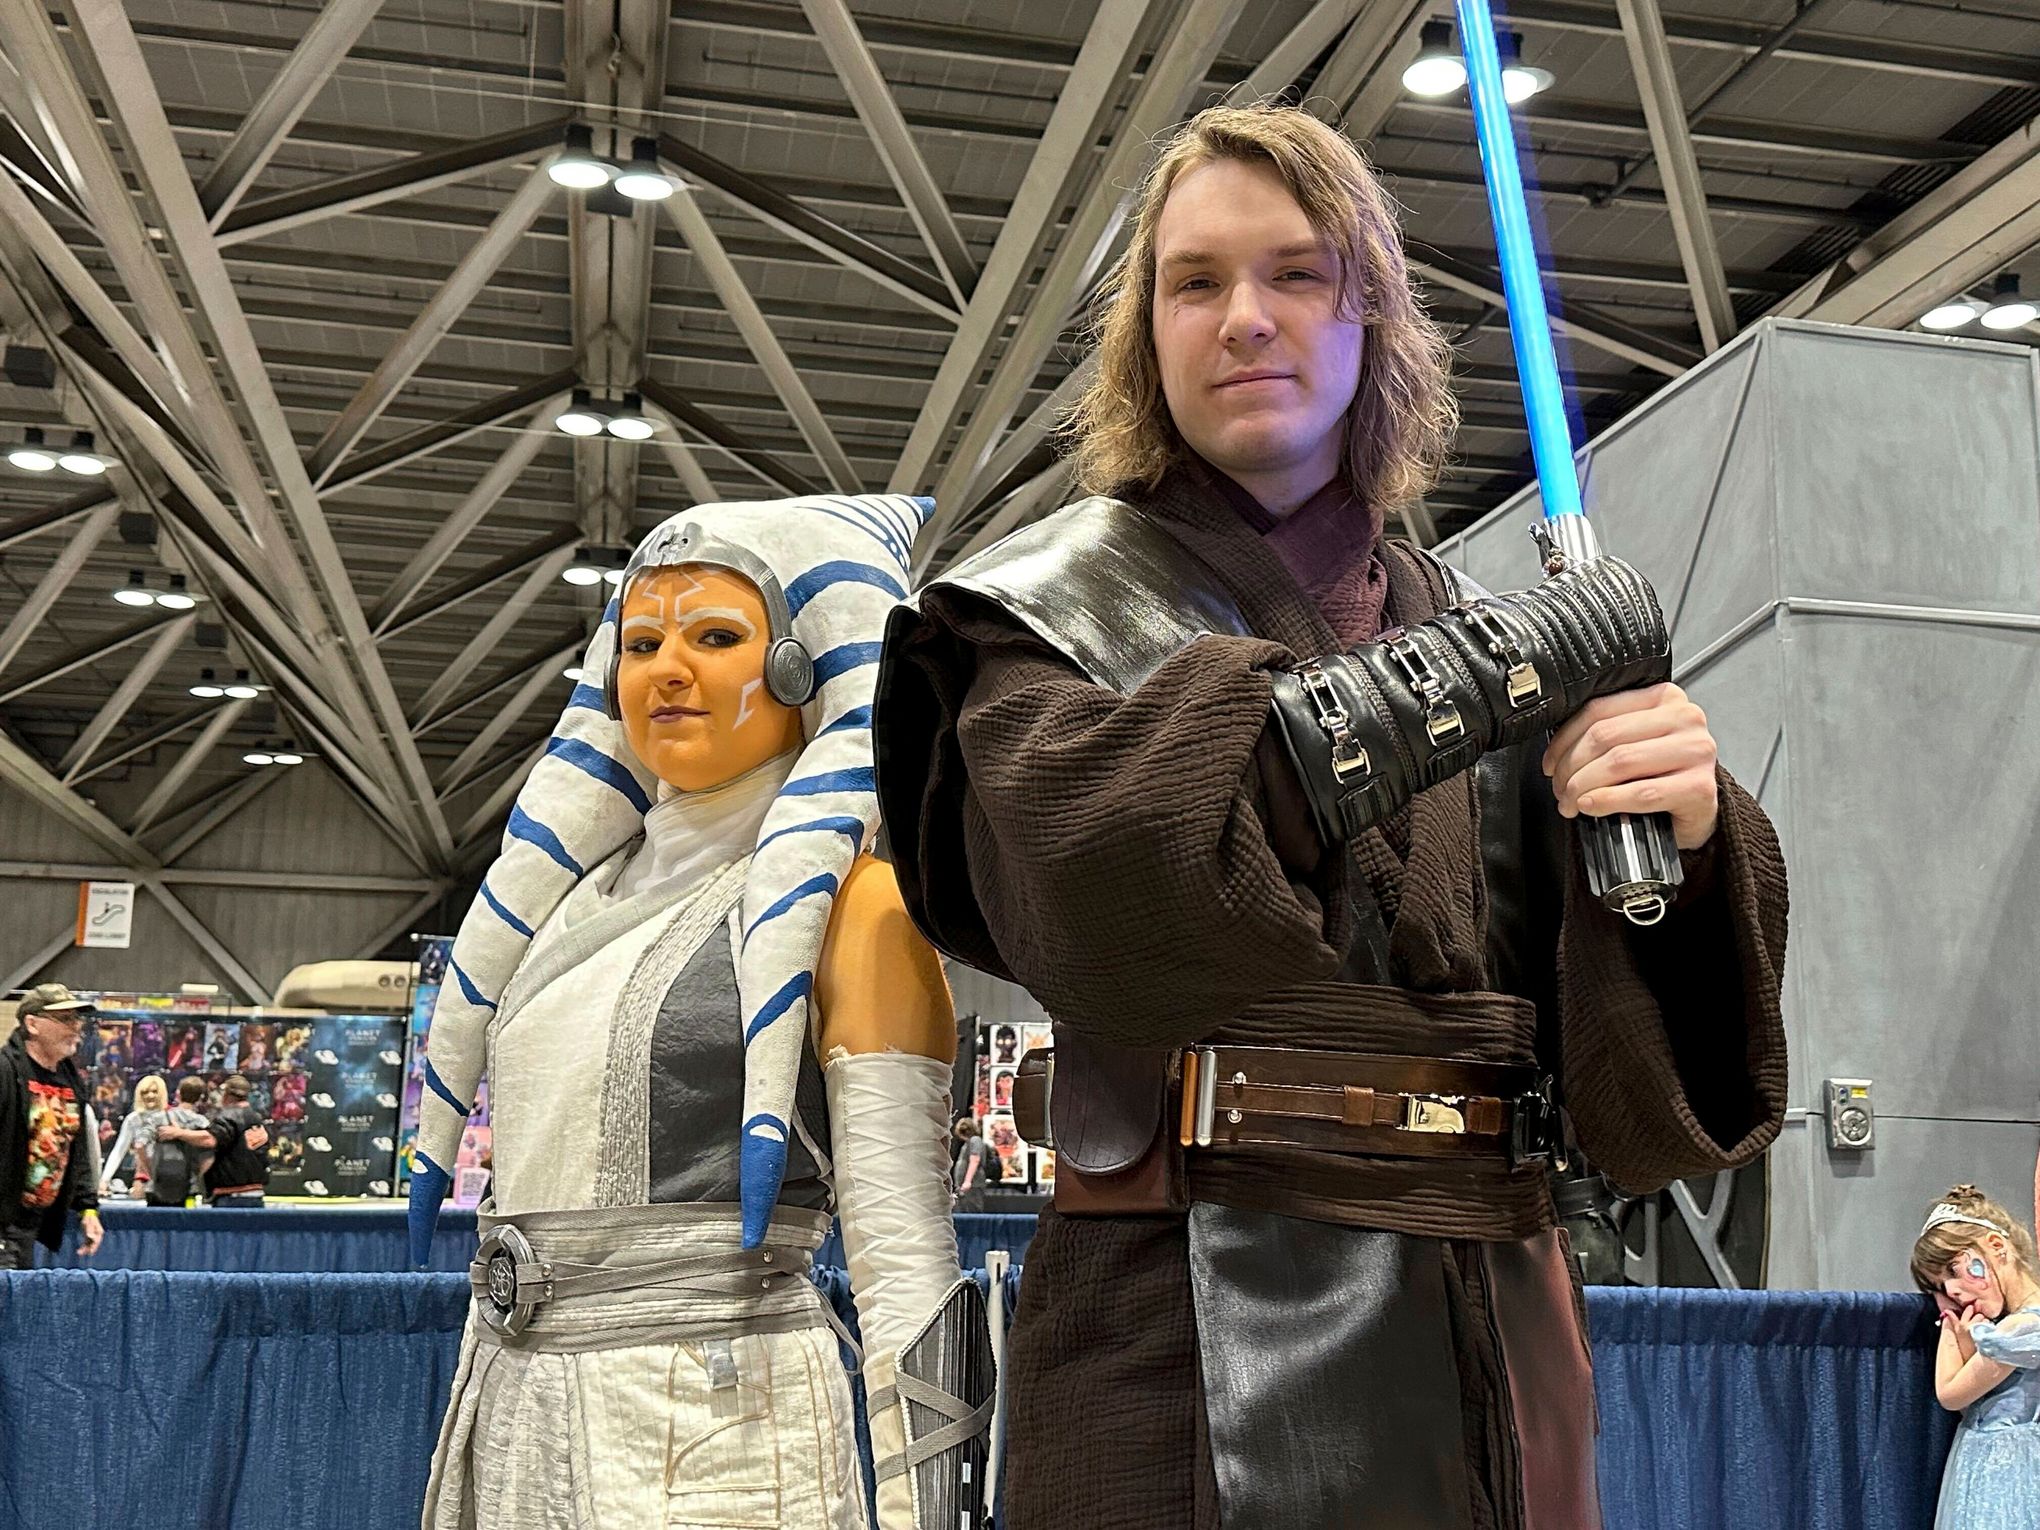 In year 25, Planet Comicon Kansas City celebrates its origin story as fans  embrace their inner nerd | The Seattle Times